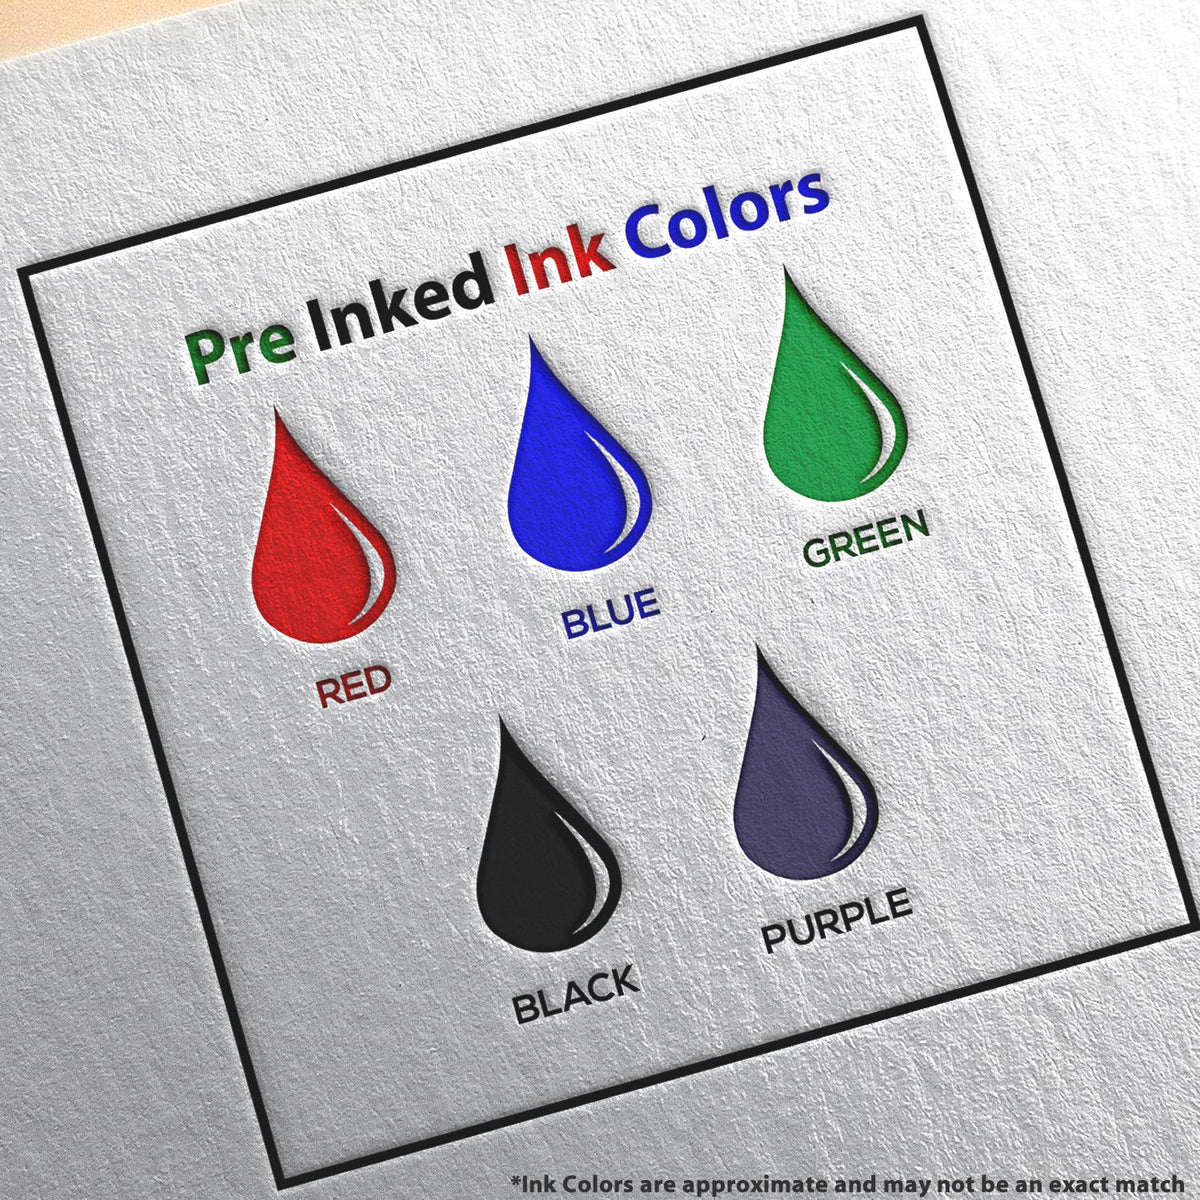 A picture showing the different ink colors or hues available for the Premium MaxLight Pre-Inked New York Engineering Stamp product.